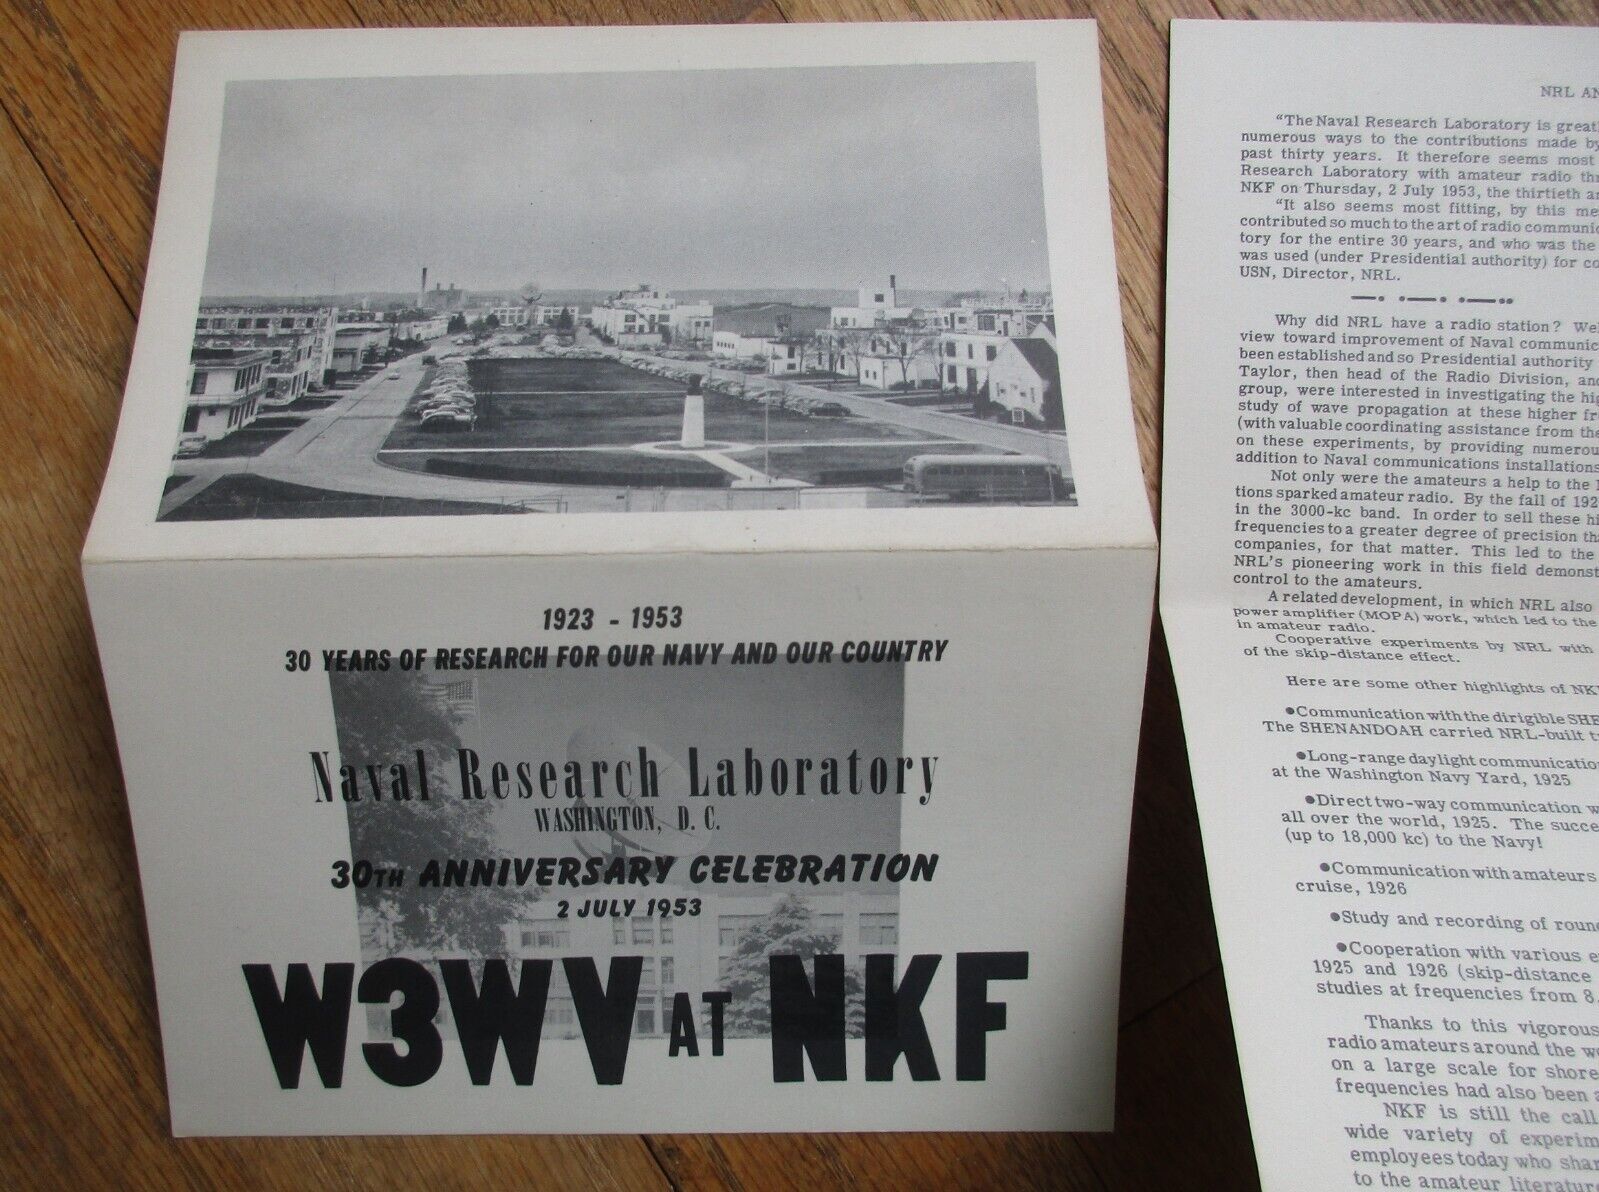 NRL - Naval Research Laboratory - W3WV at NKF - 30th anniversary card